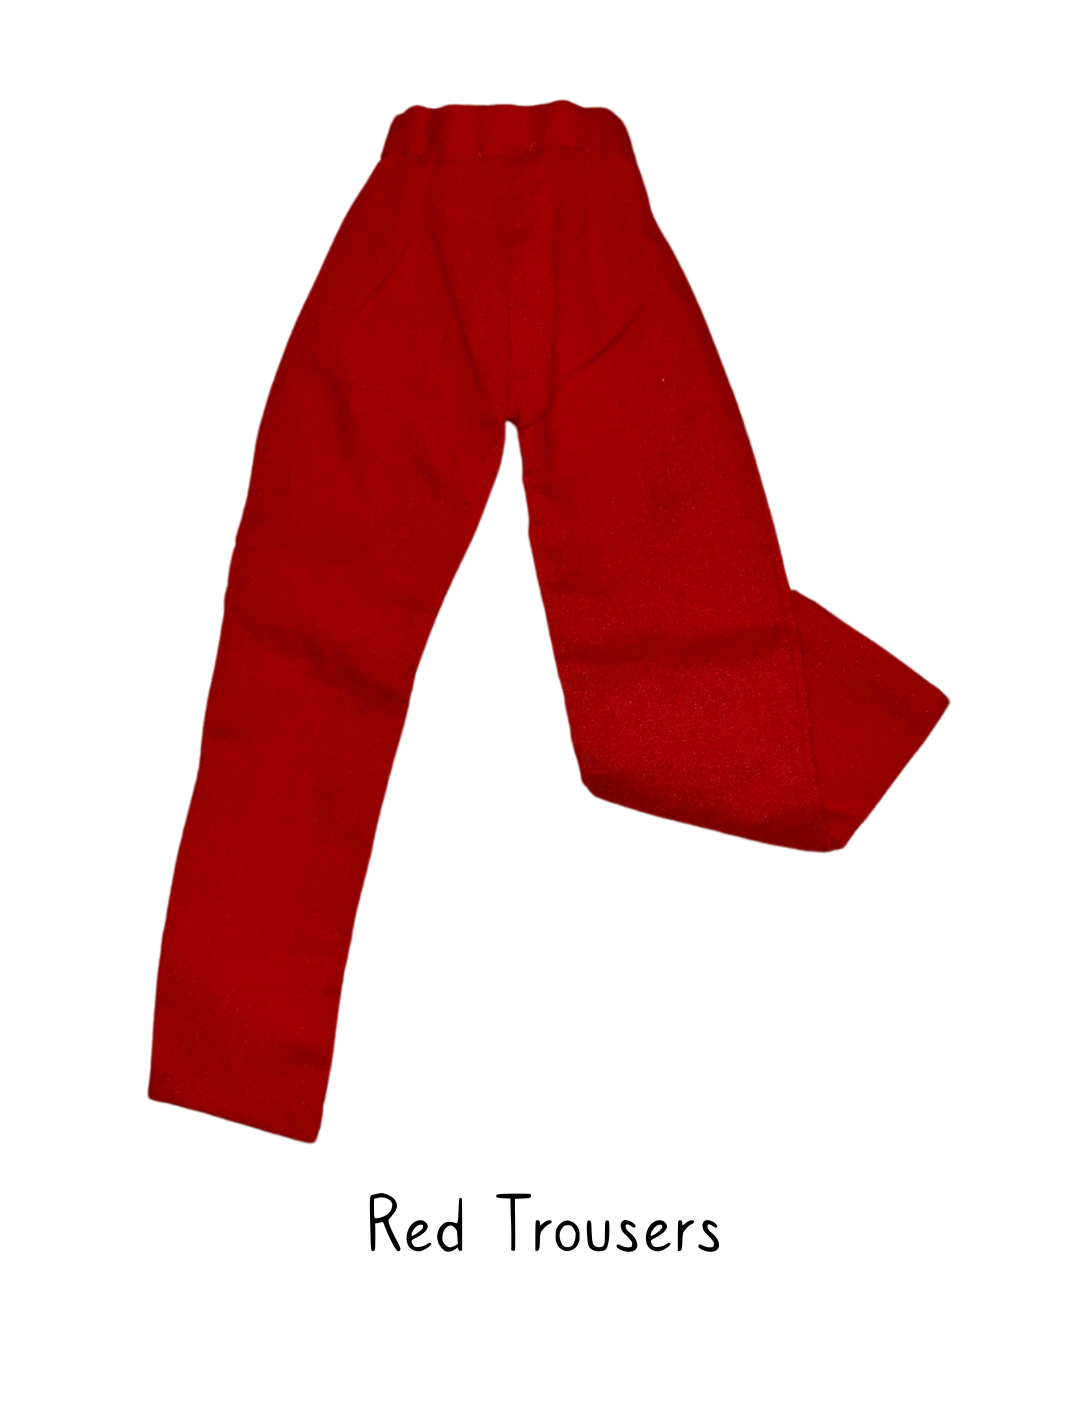 1984 - 1985 Pedigree Sindy Doll Casuals Fashion Red Trousers